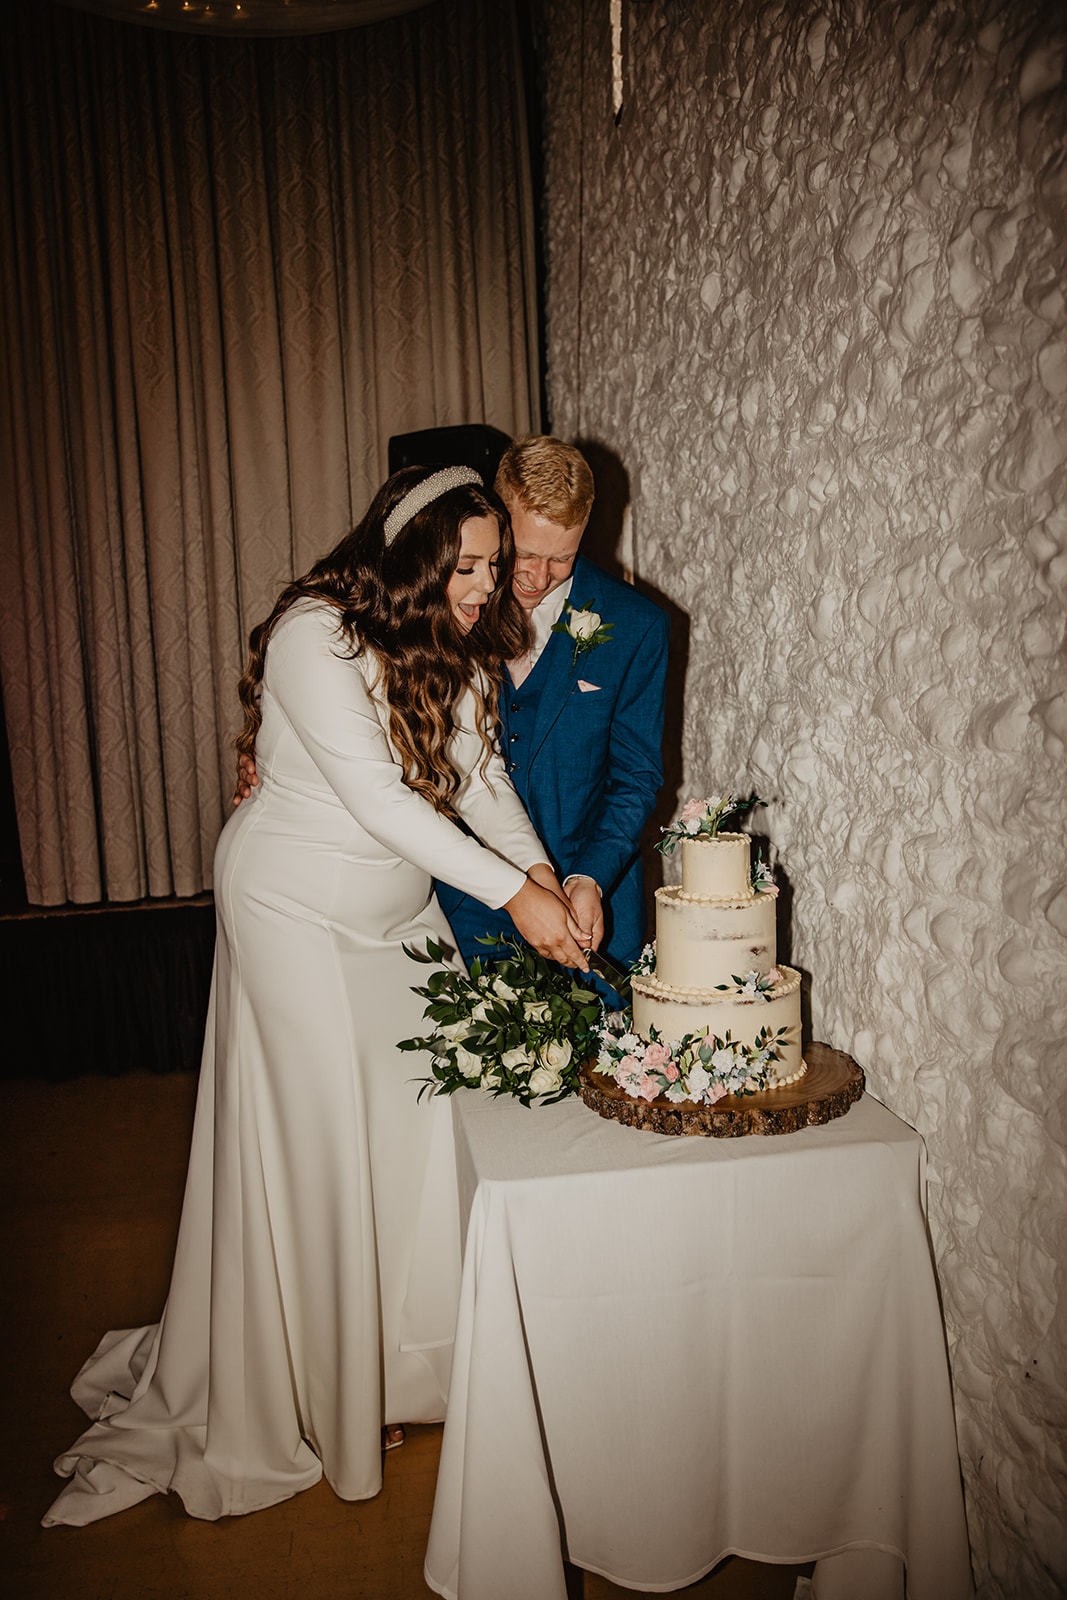 Bride and Groom cutting cake at a Field Place Manor House Wedding in Worthing, Sussex. By Olive Joy Photography